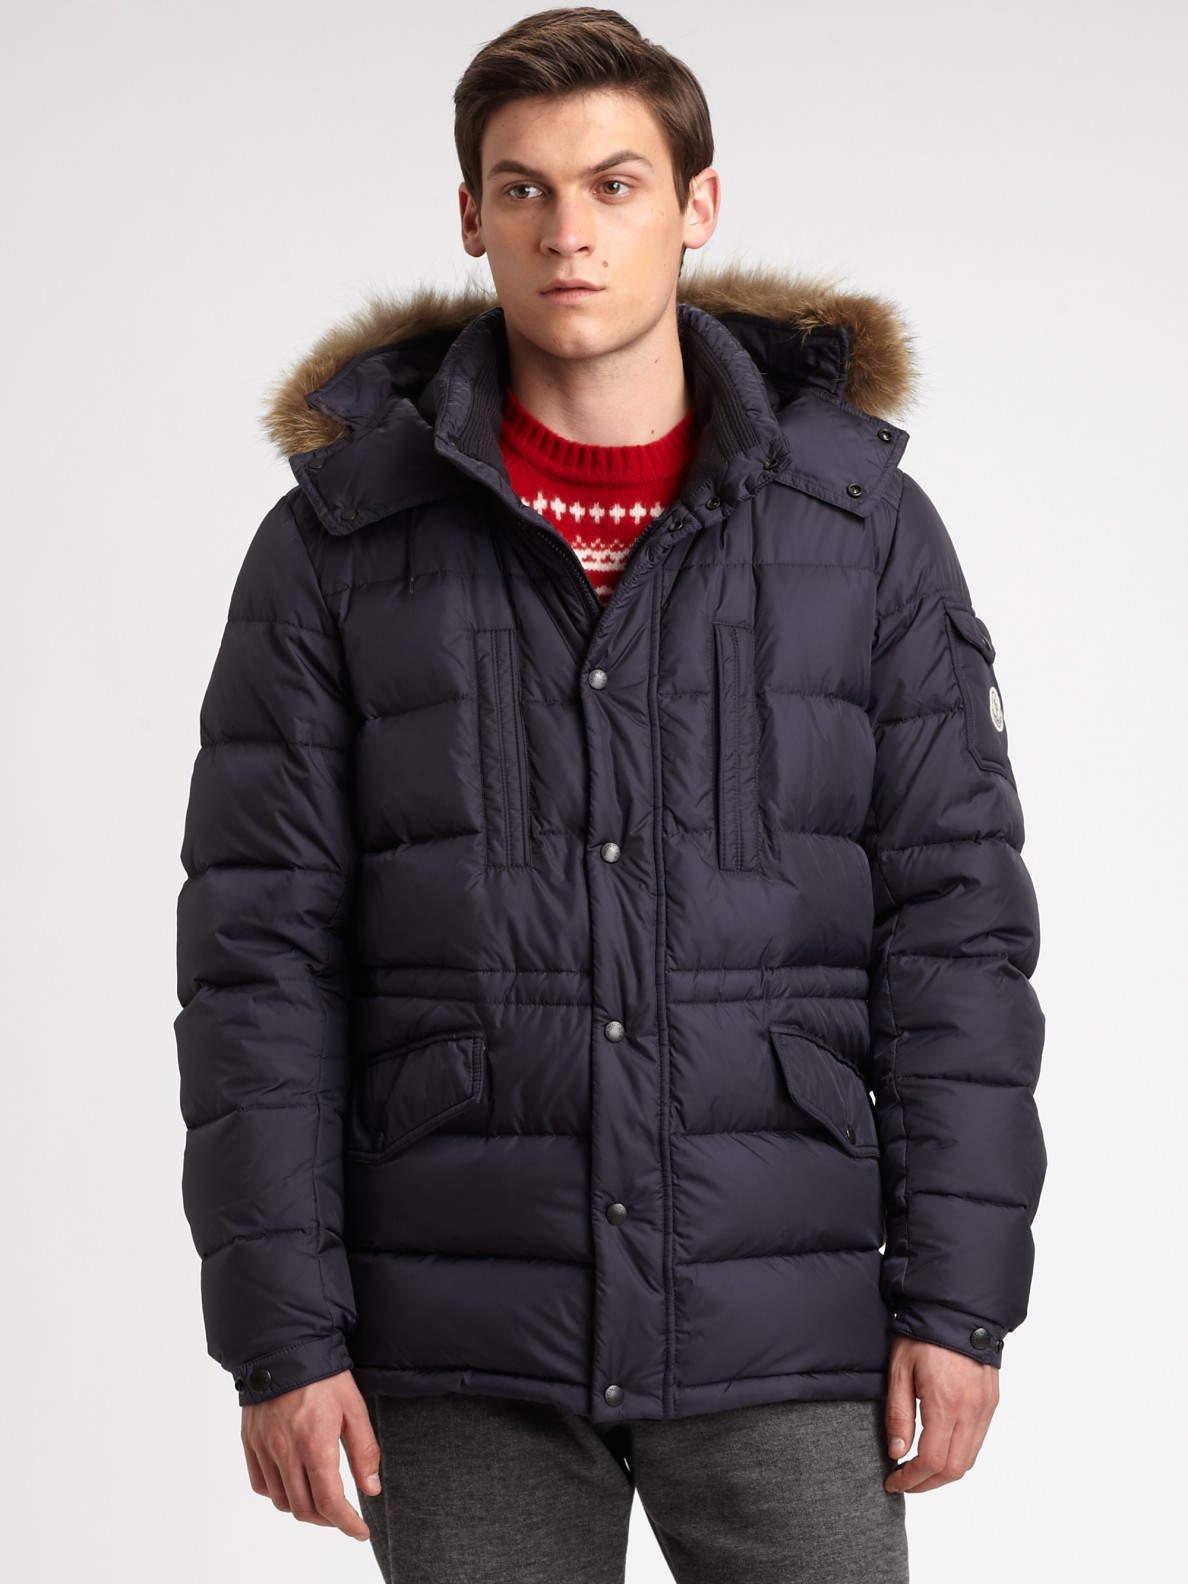 Moncler Riviere Fur Hooded Down Parka in Navy (Blue) for Men - Lyst